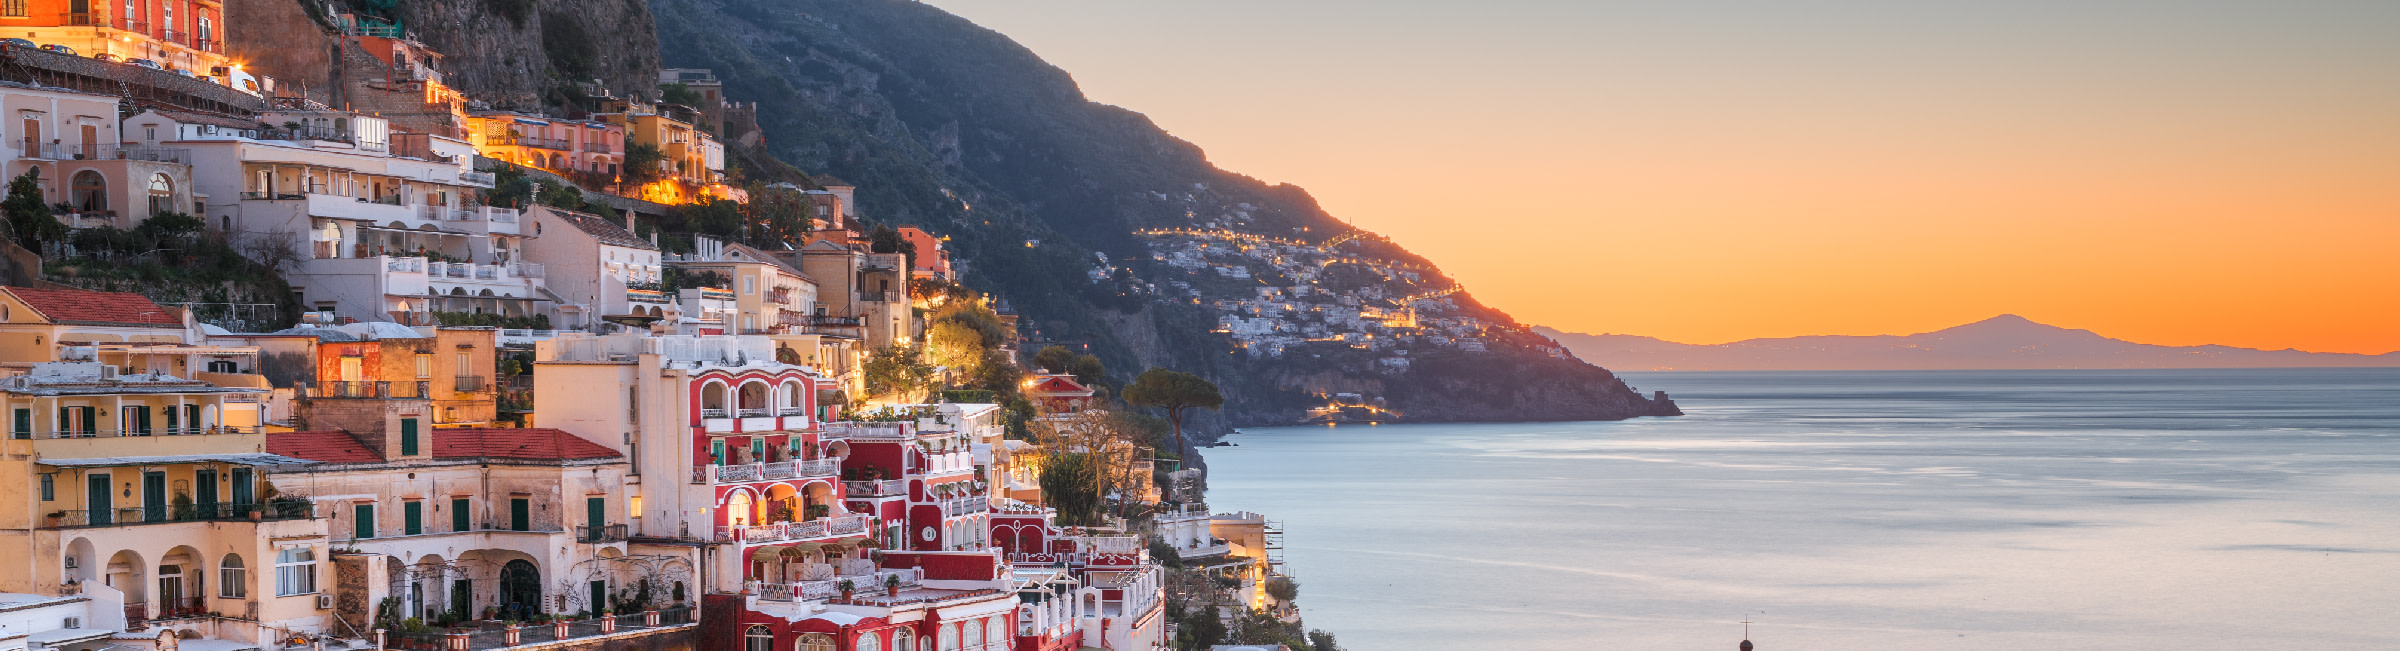 Small white houses sit on hillsides overlooking the bay of Positano and a beautiful sunset.